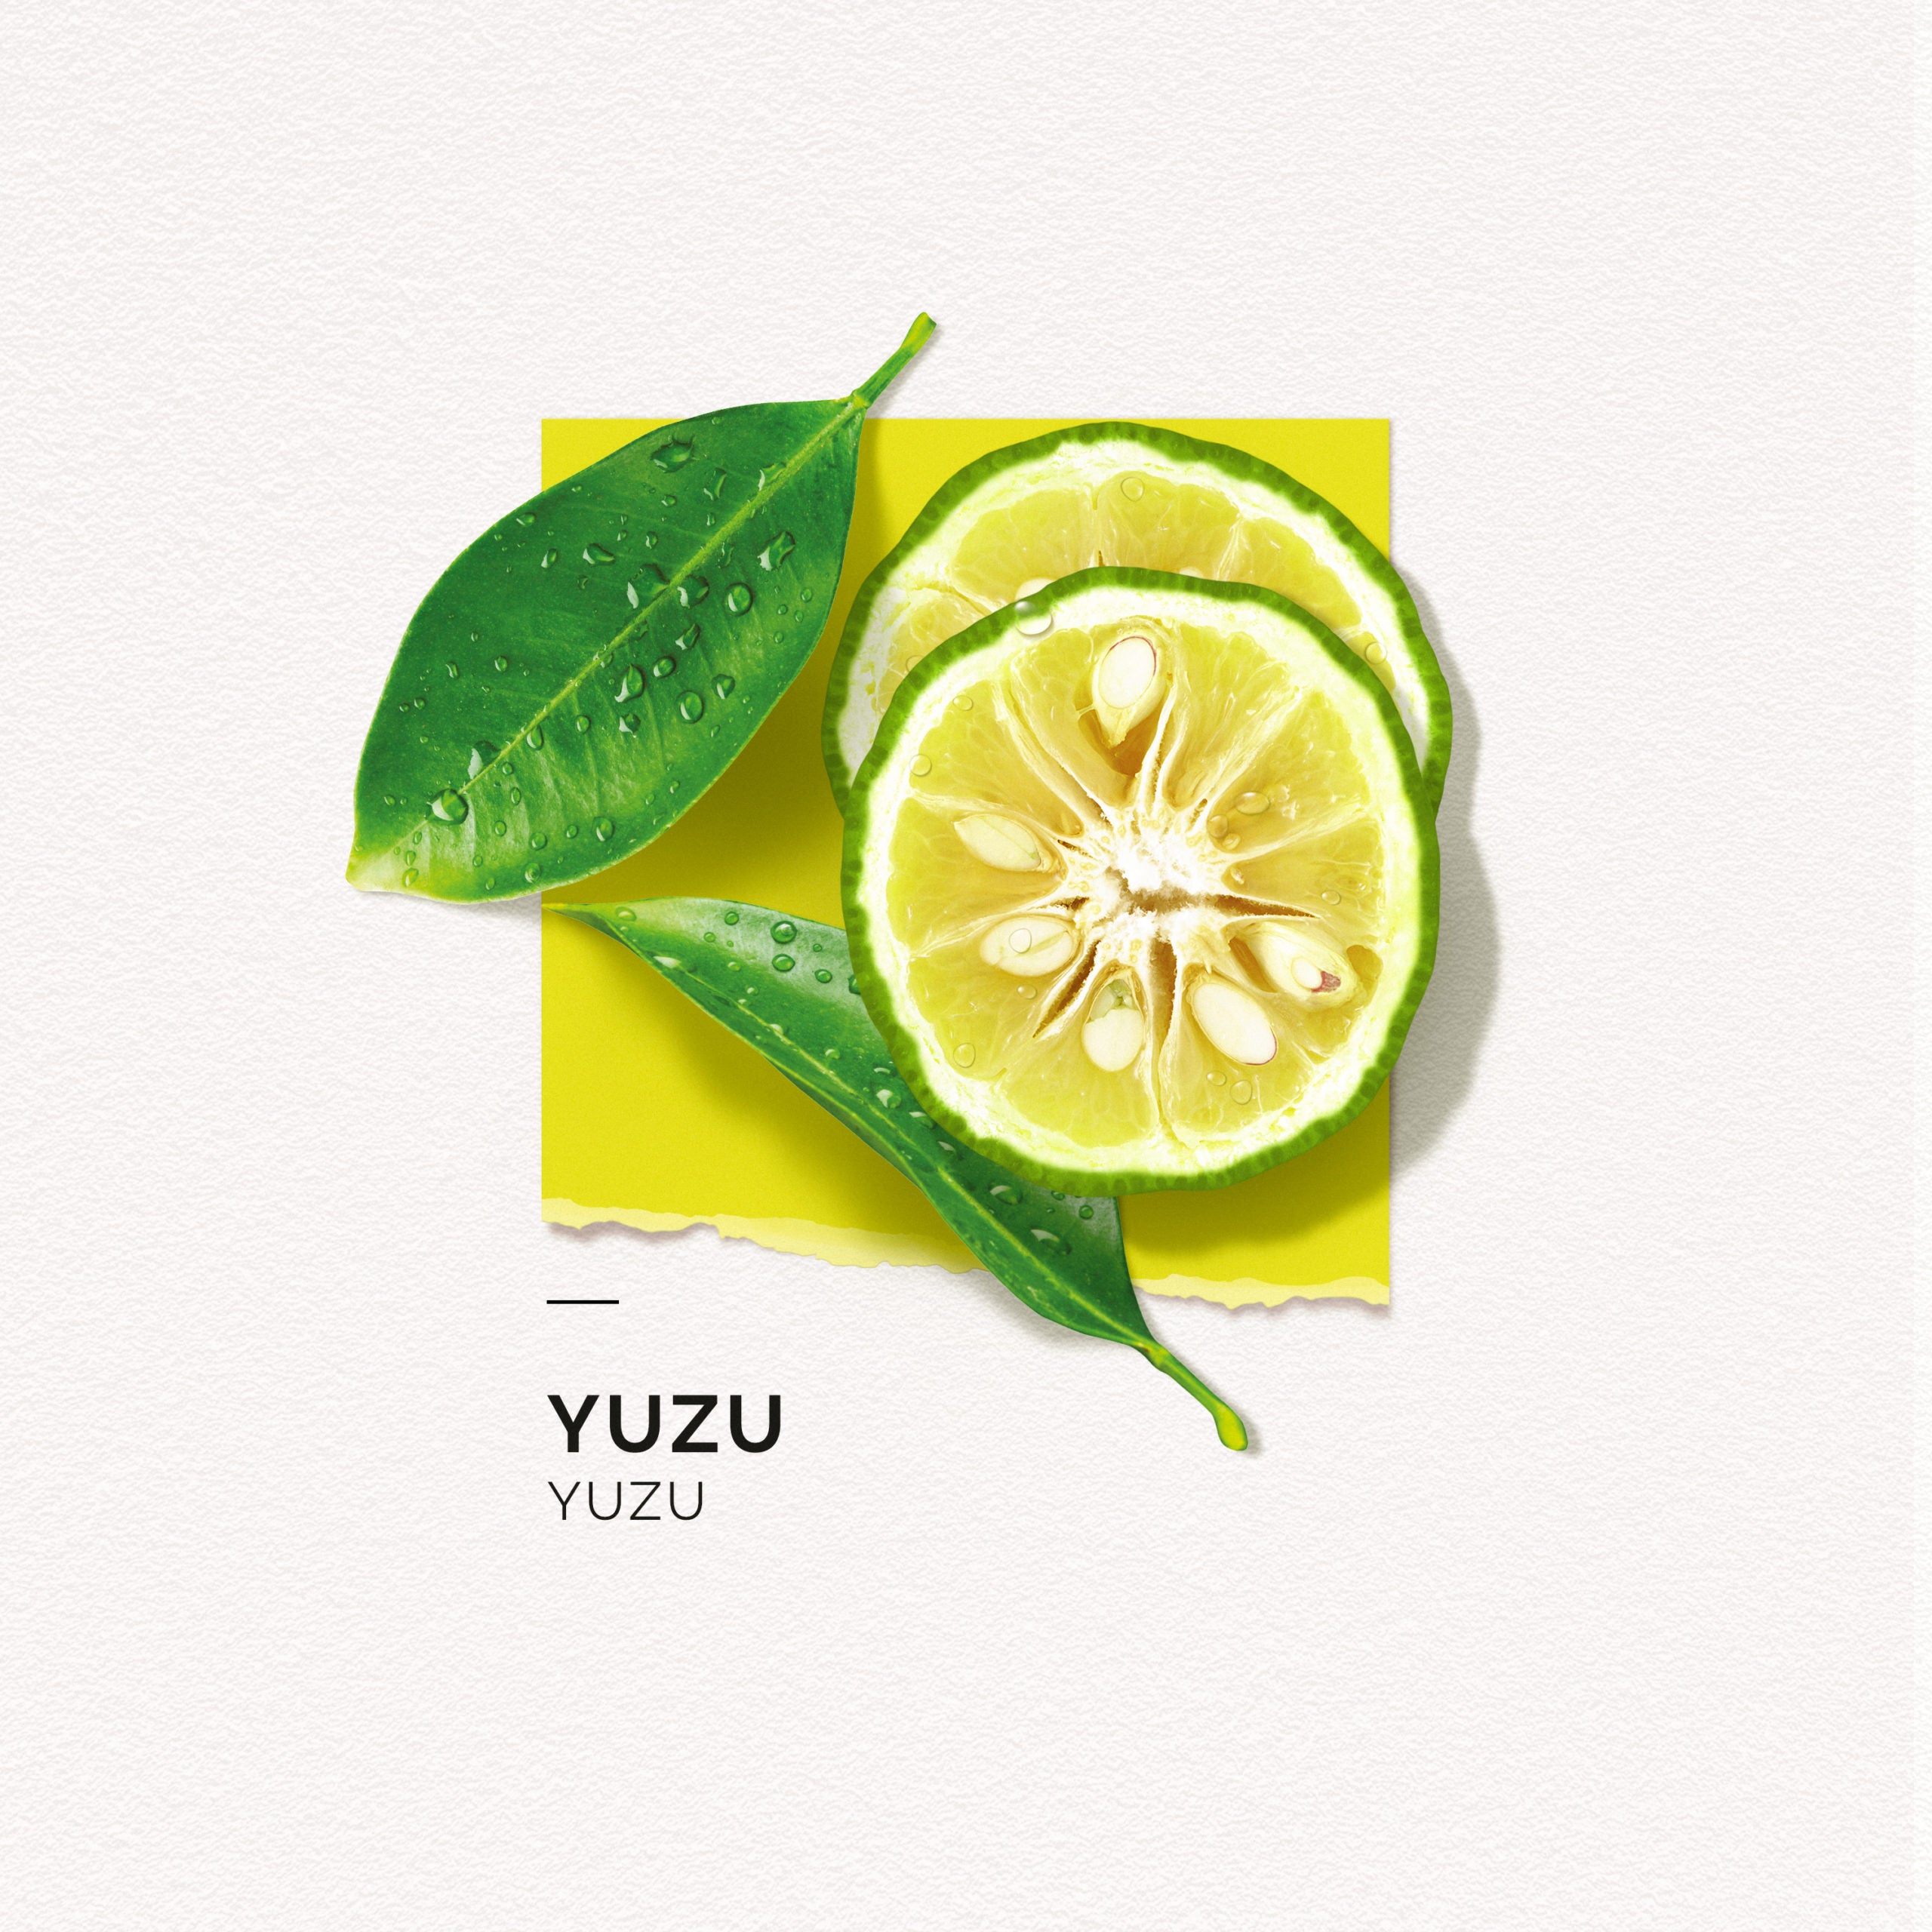 What Does Yuzu Smell Like?